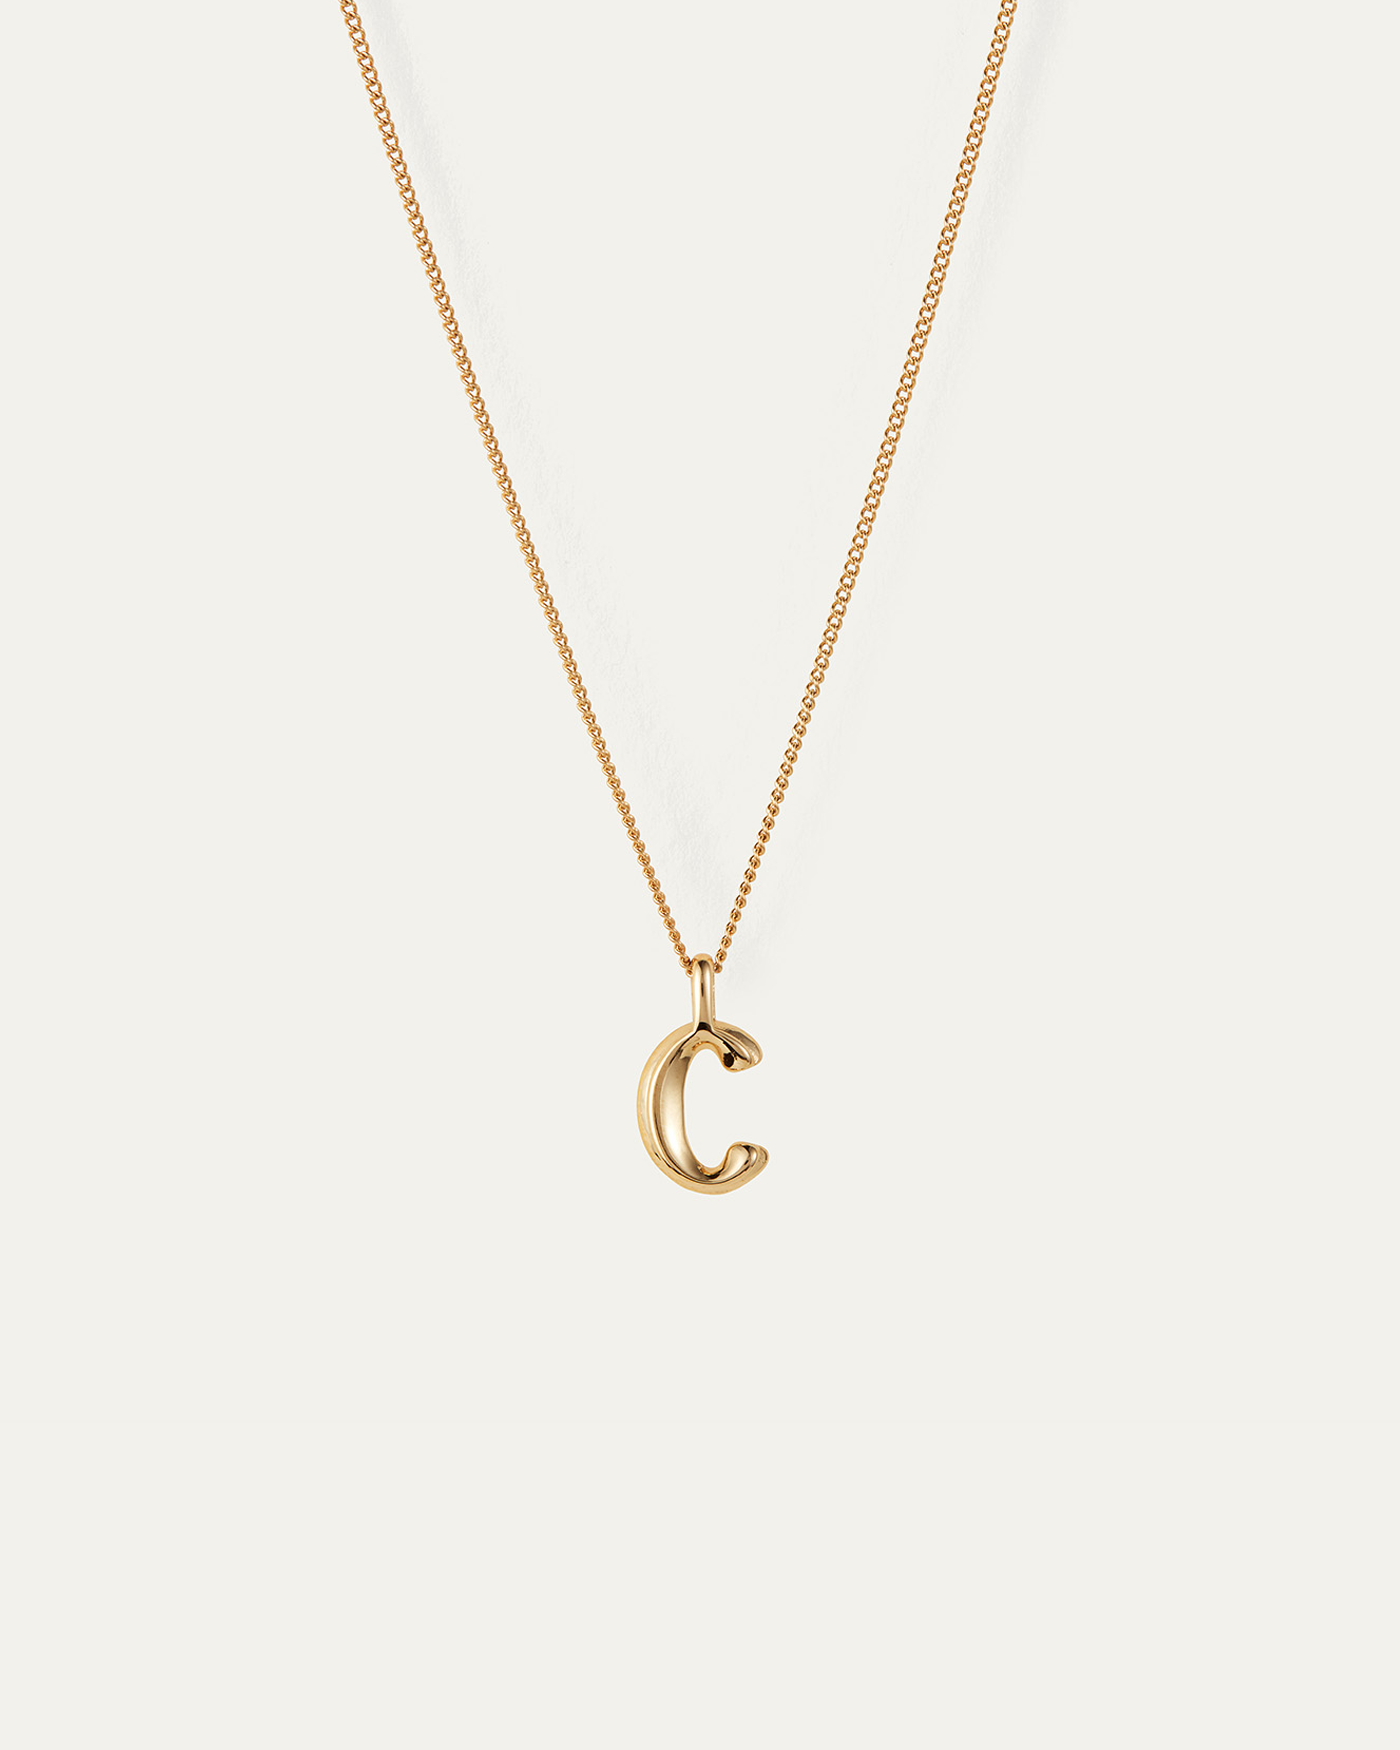 Silver C Letter Necklace | Royal Chain Group